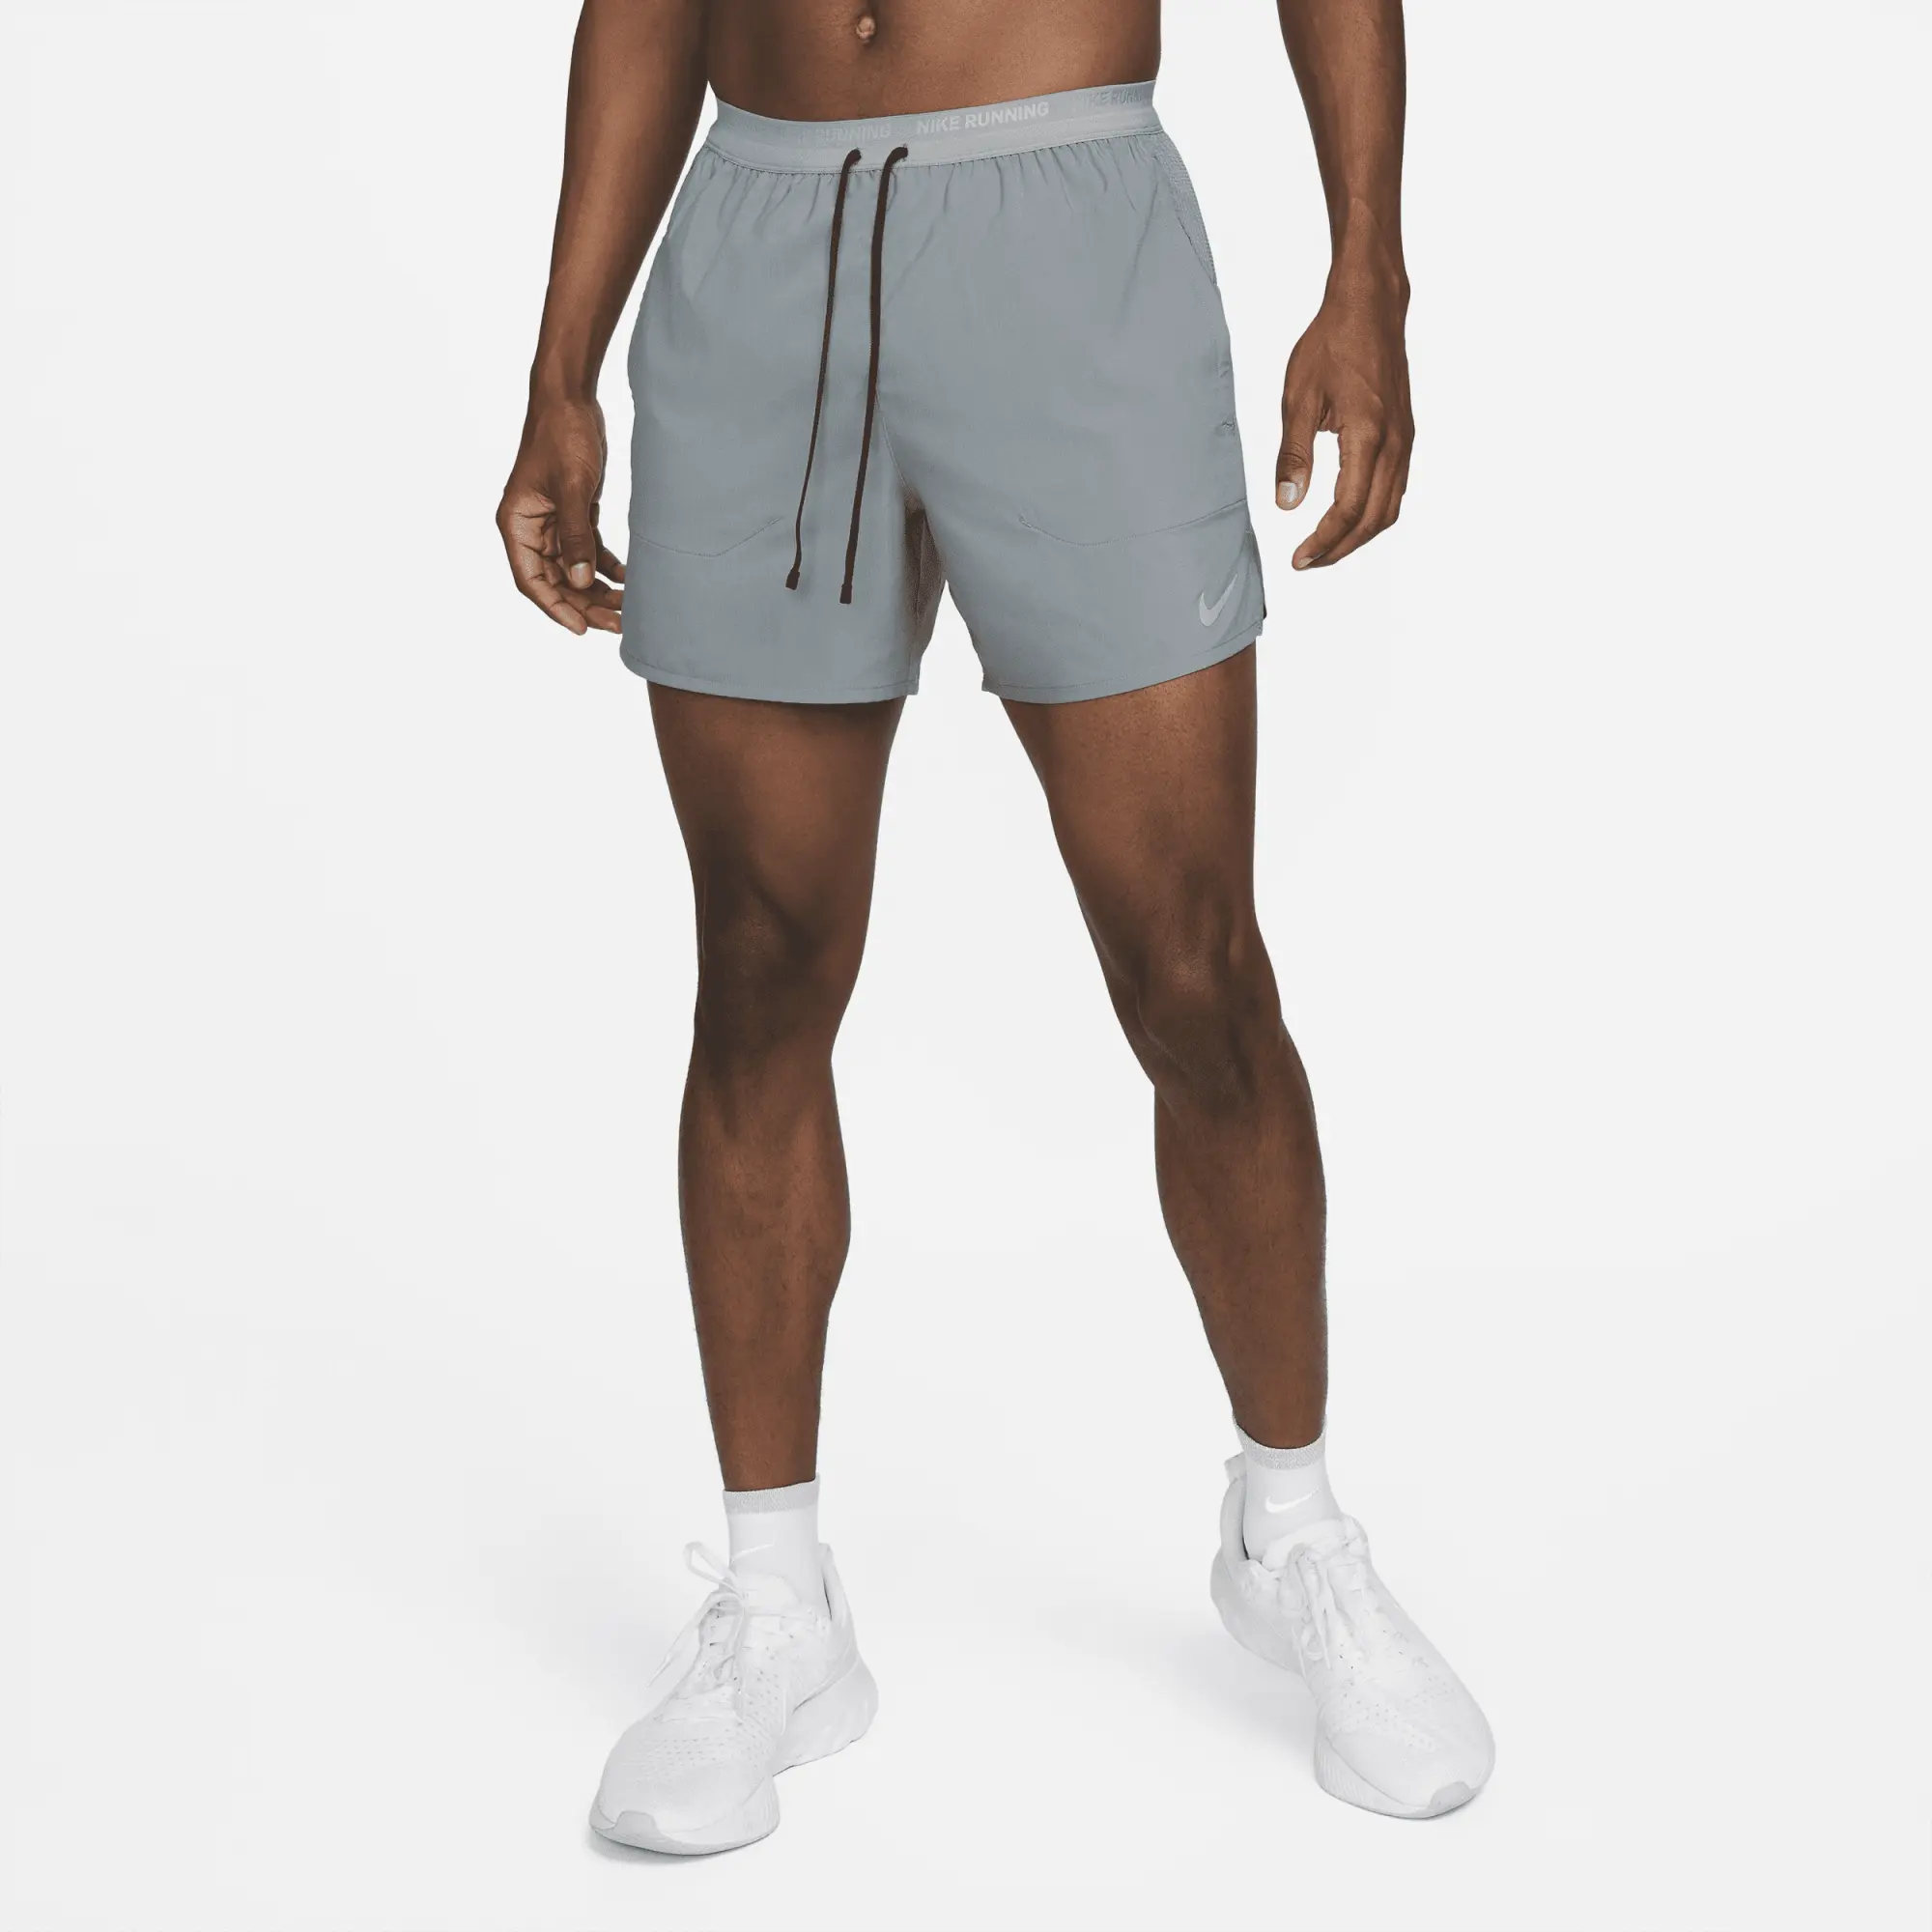 Nike Stride Men's Dri-FIT 13cm (approx.) Brief-Lined Running Shorts - Grey